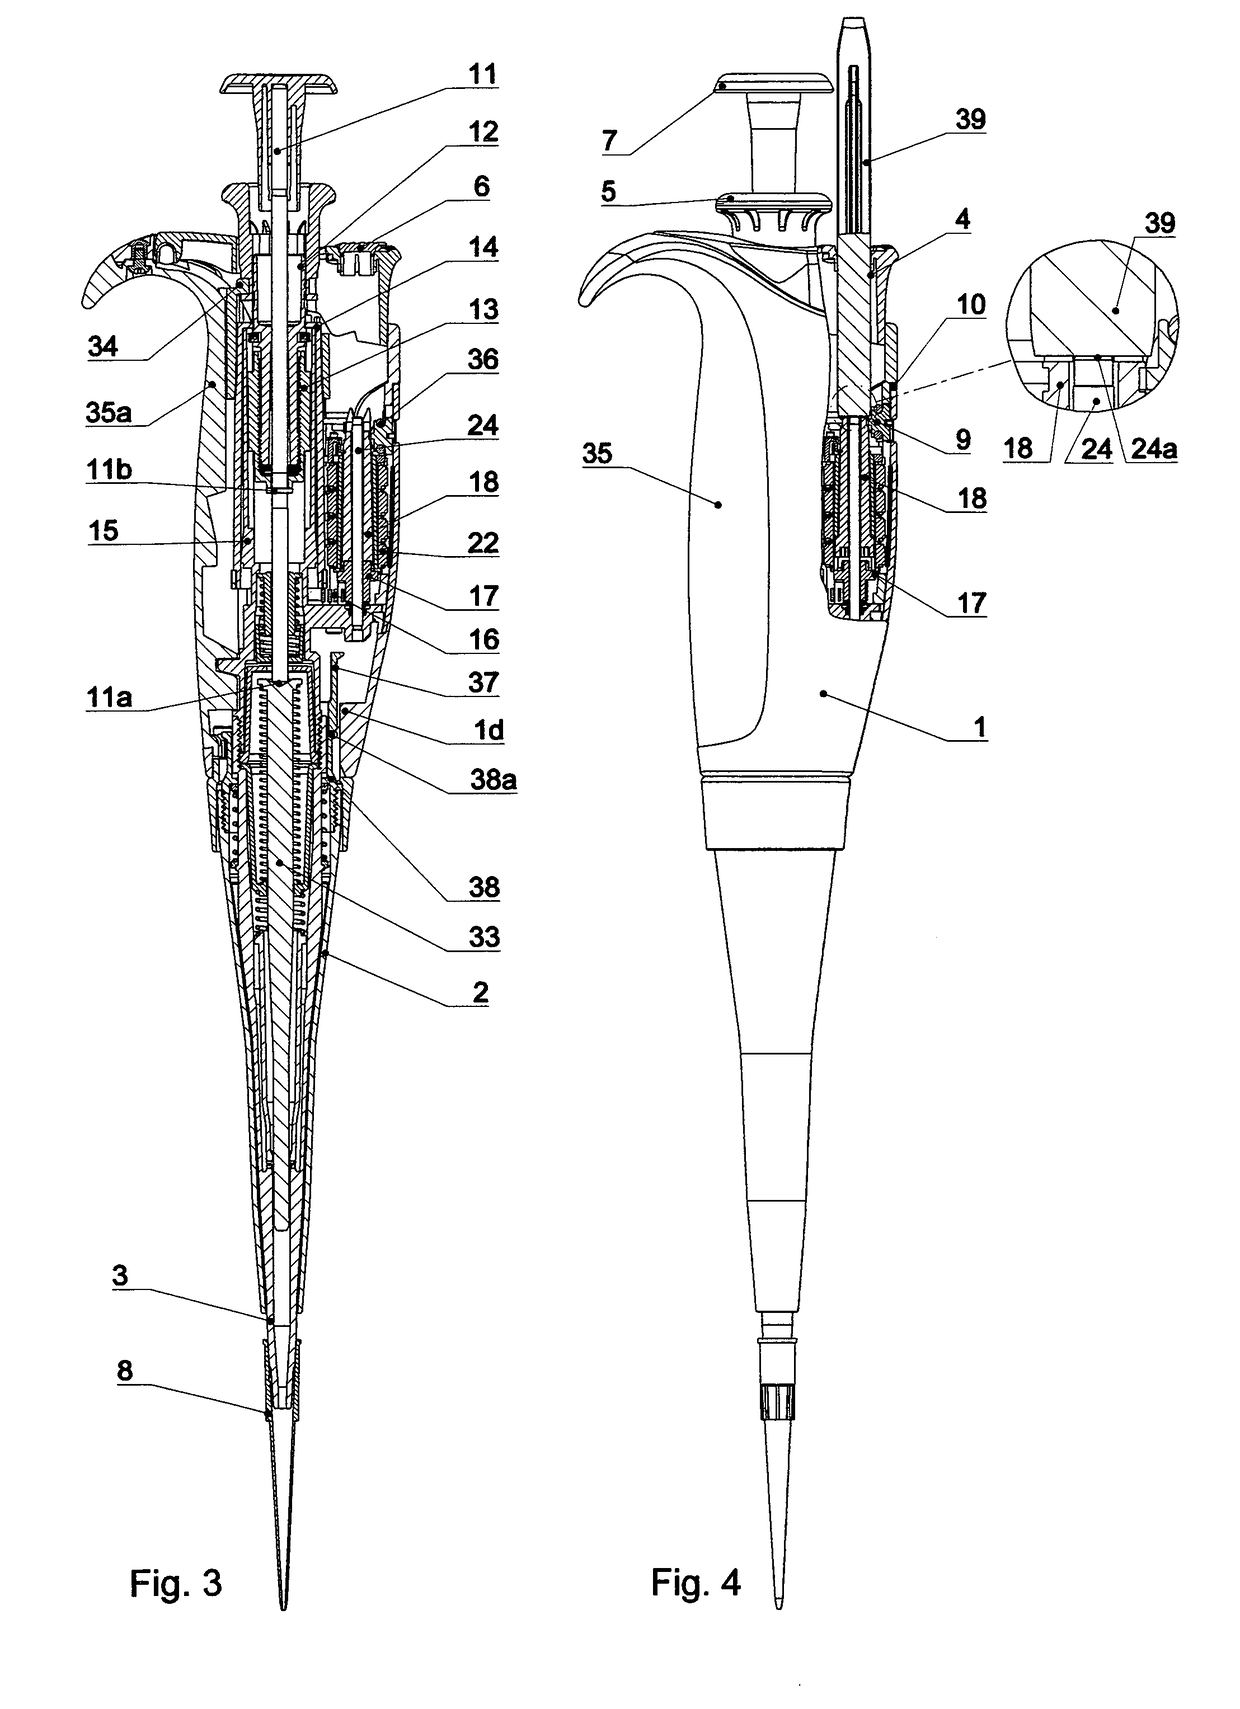 Mechanical pipette with adjustable volume value of aspirated liquid